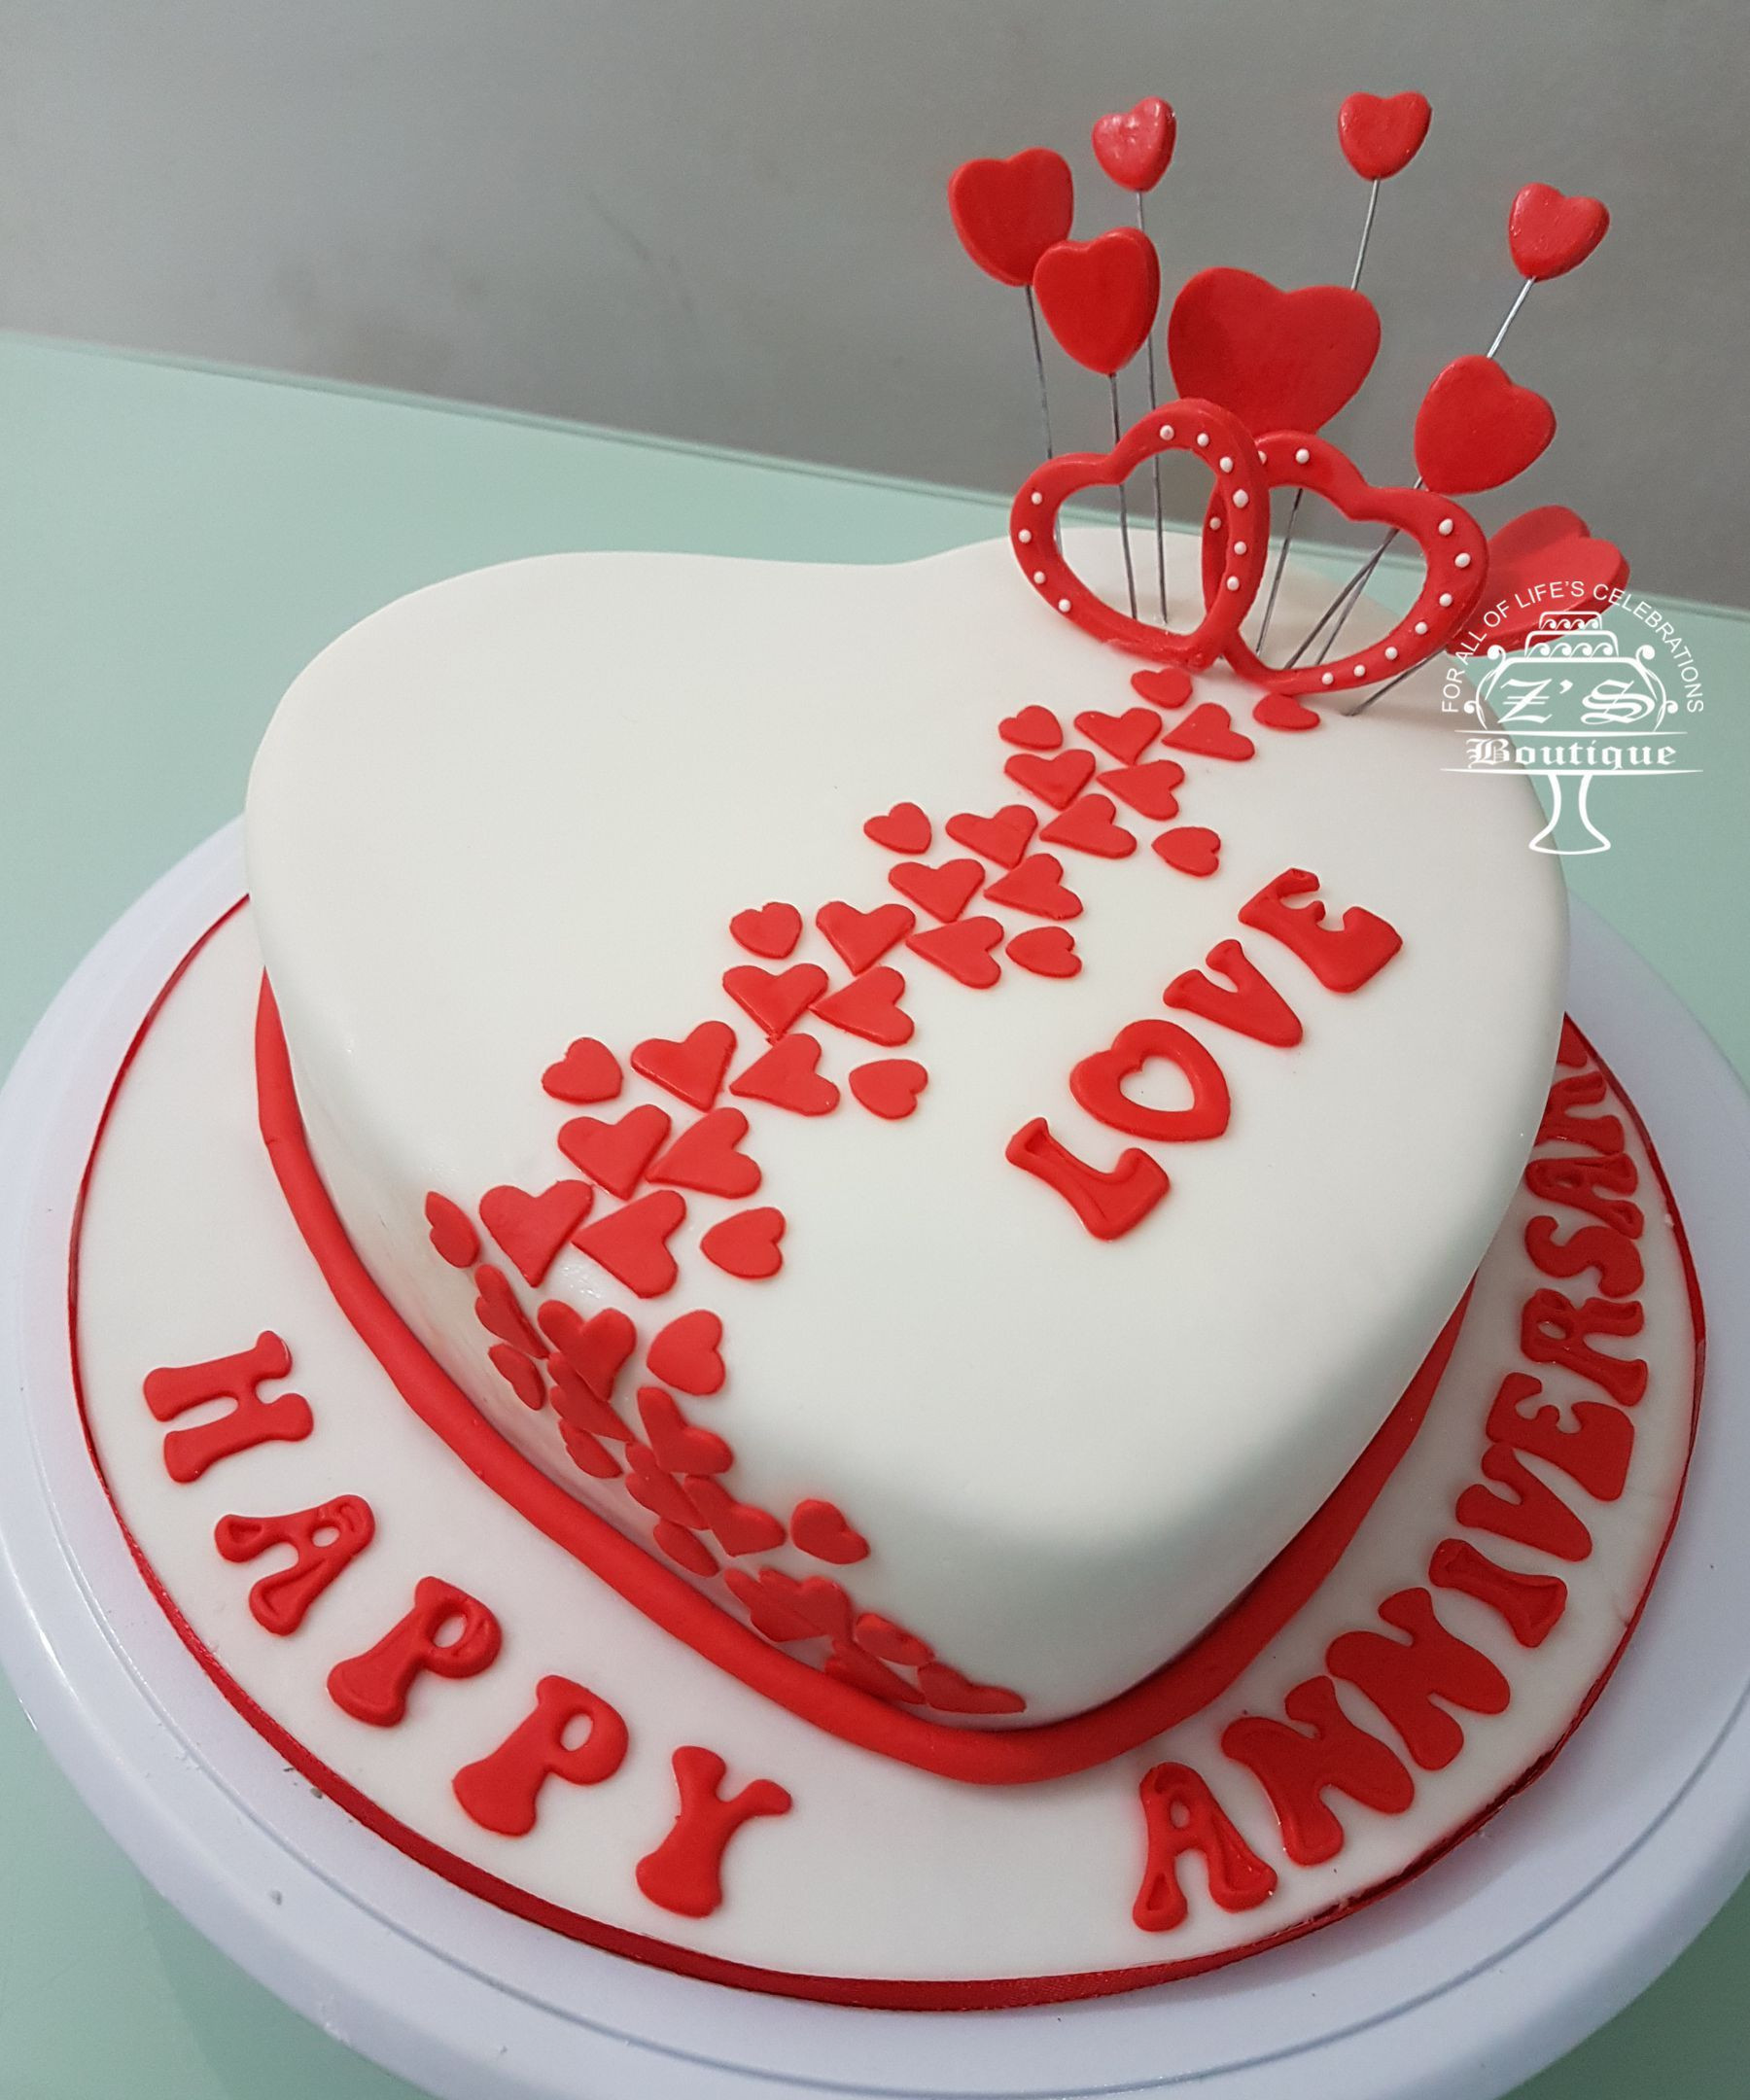 2nd wedding anniversary cakes pictures anniversary cake happy anniversary red heart love of 2nd wedding anniversary cakes pictures